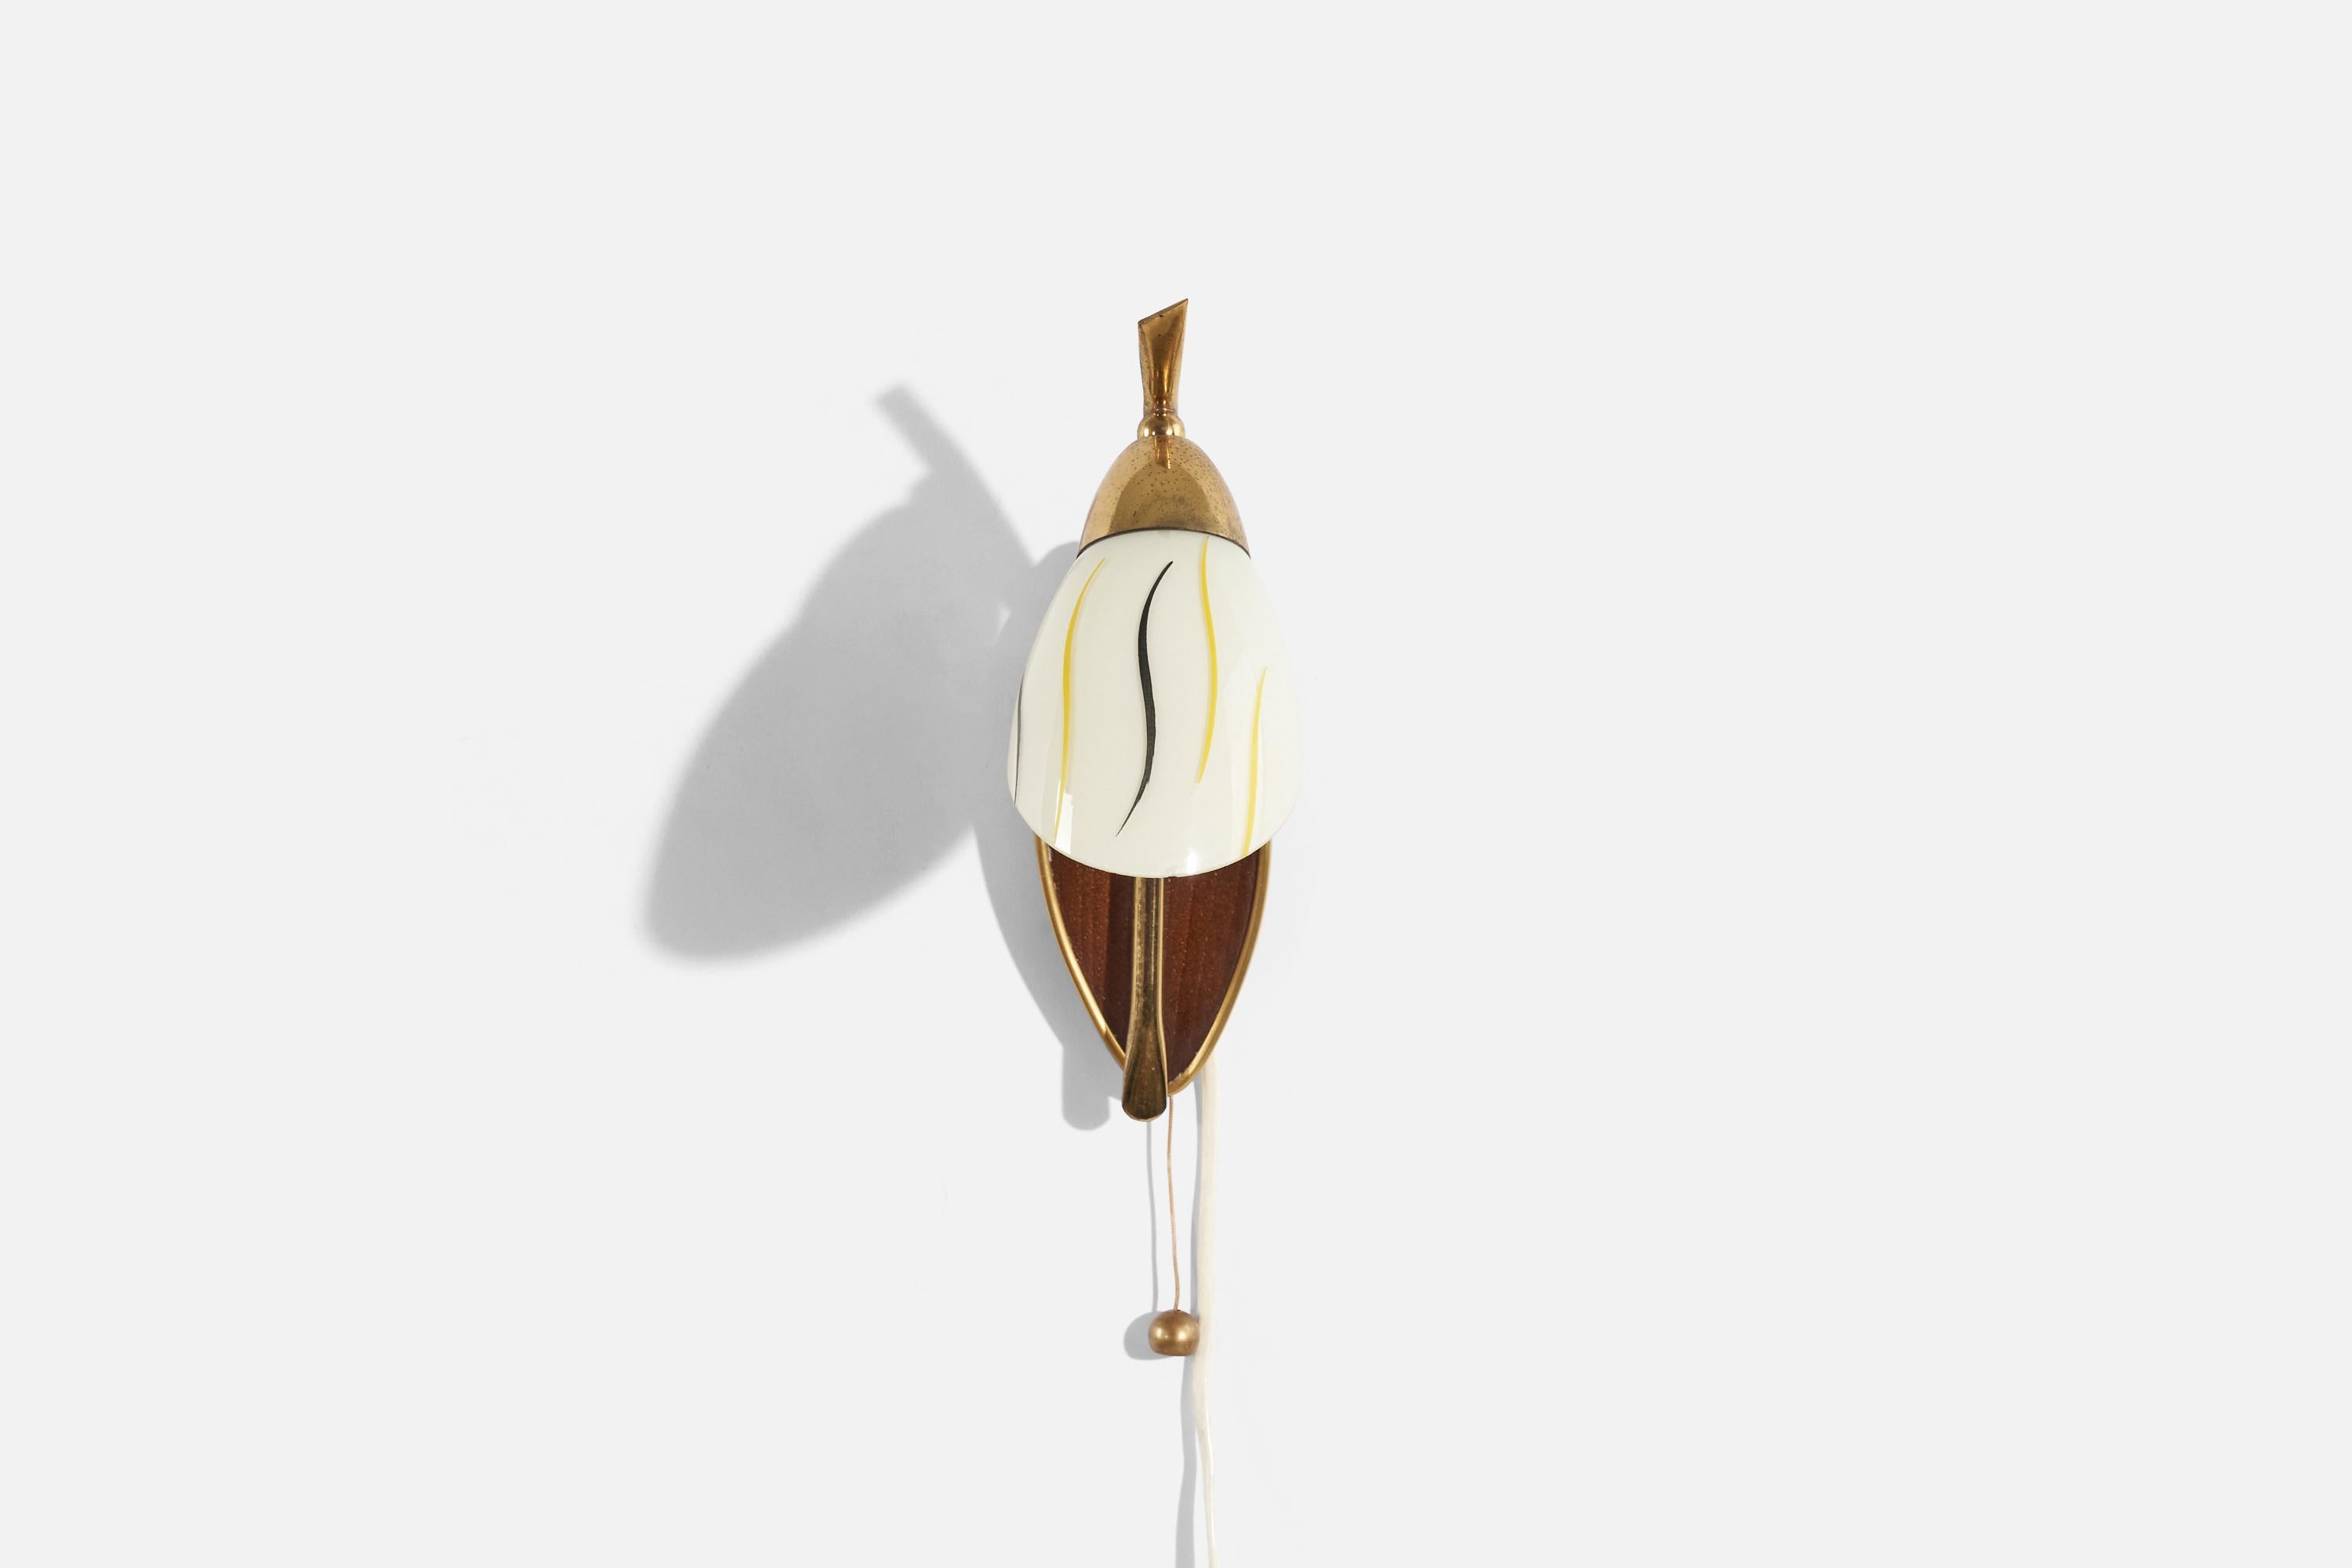 A brass, glass and teak wall light, designed and produced by a Swedish designer, Sweden, 1950s.

Dimensions of the back plate (inches) : 3.875 x 1.5 x .75 (H x W x D).